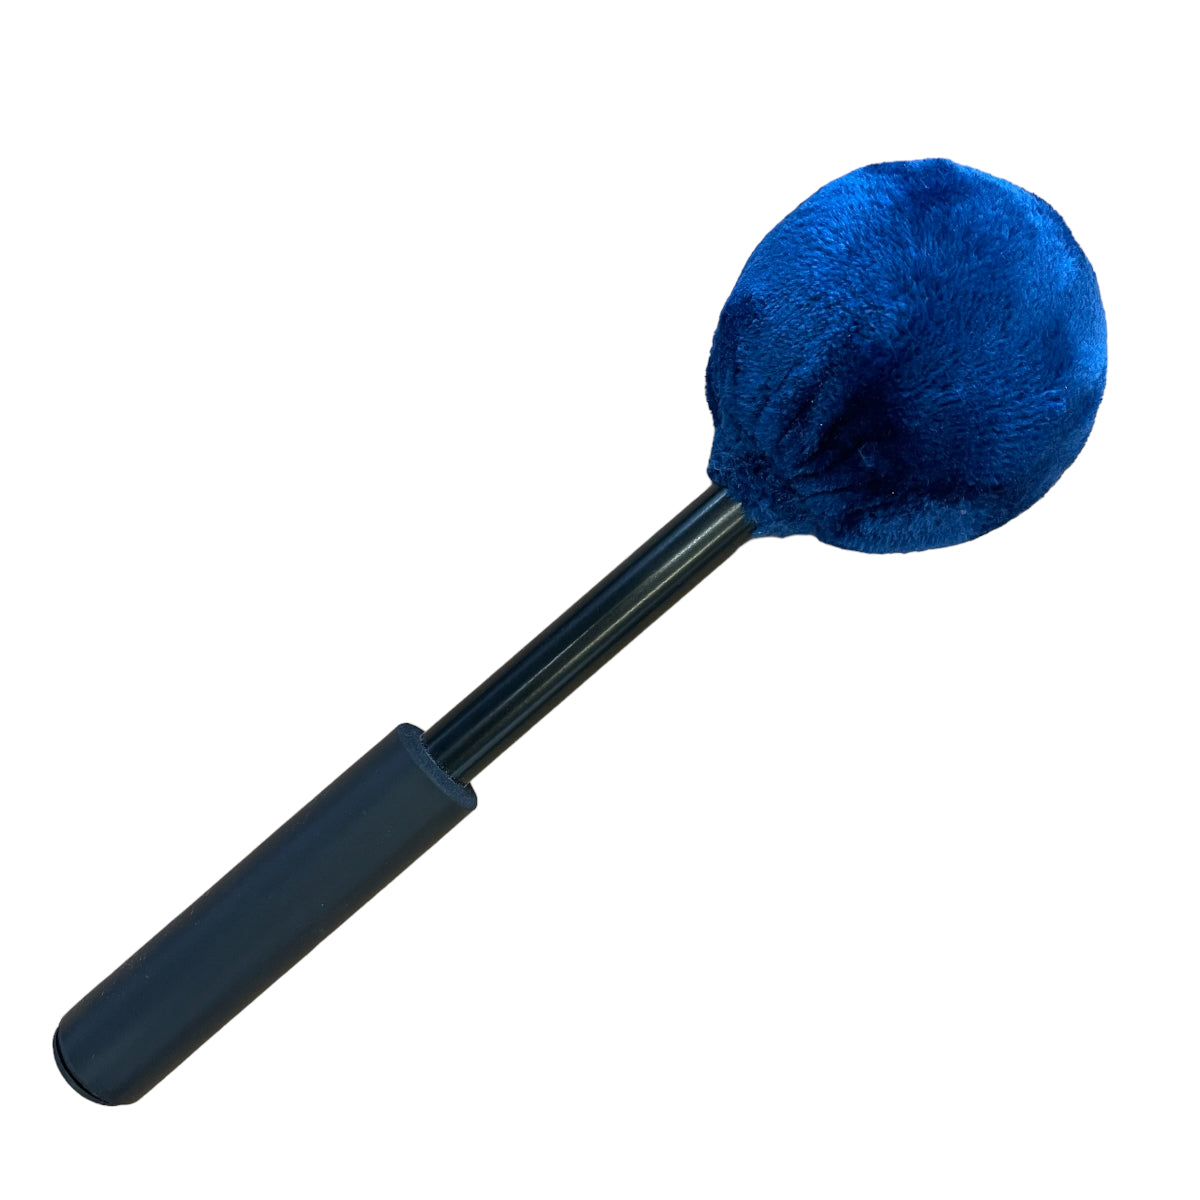 Grotta Sonora Large Gong Mallets